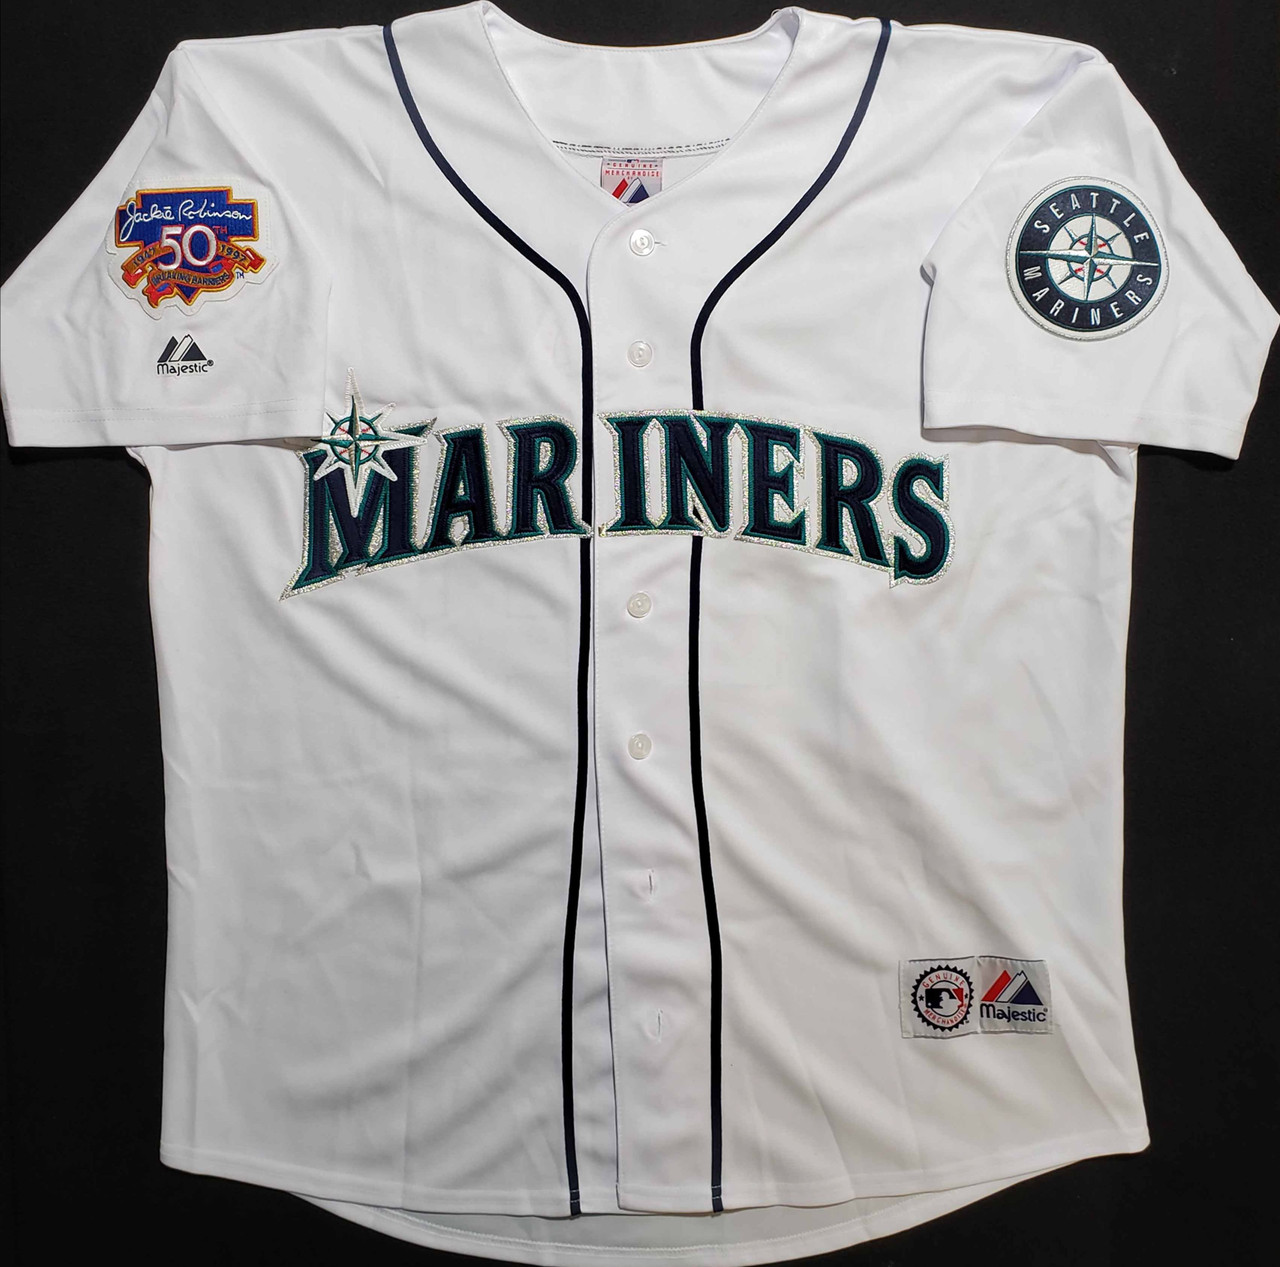 Seattle Mariners MLB Original Autographed Jerseys for sale